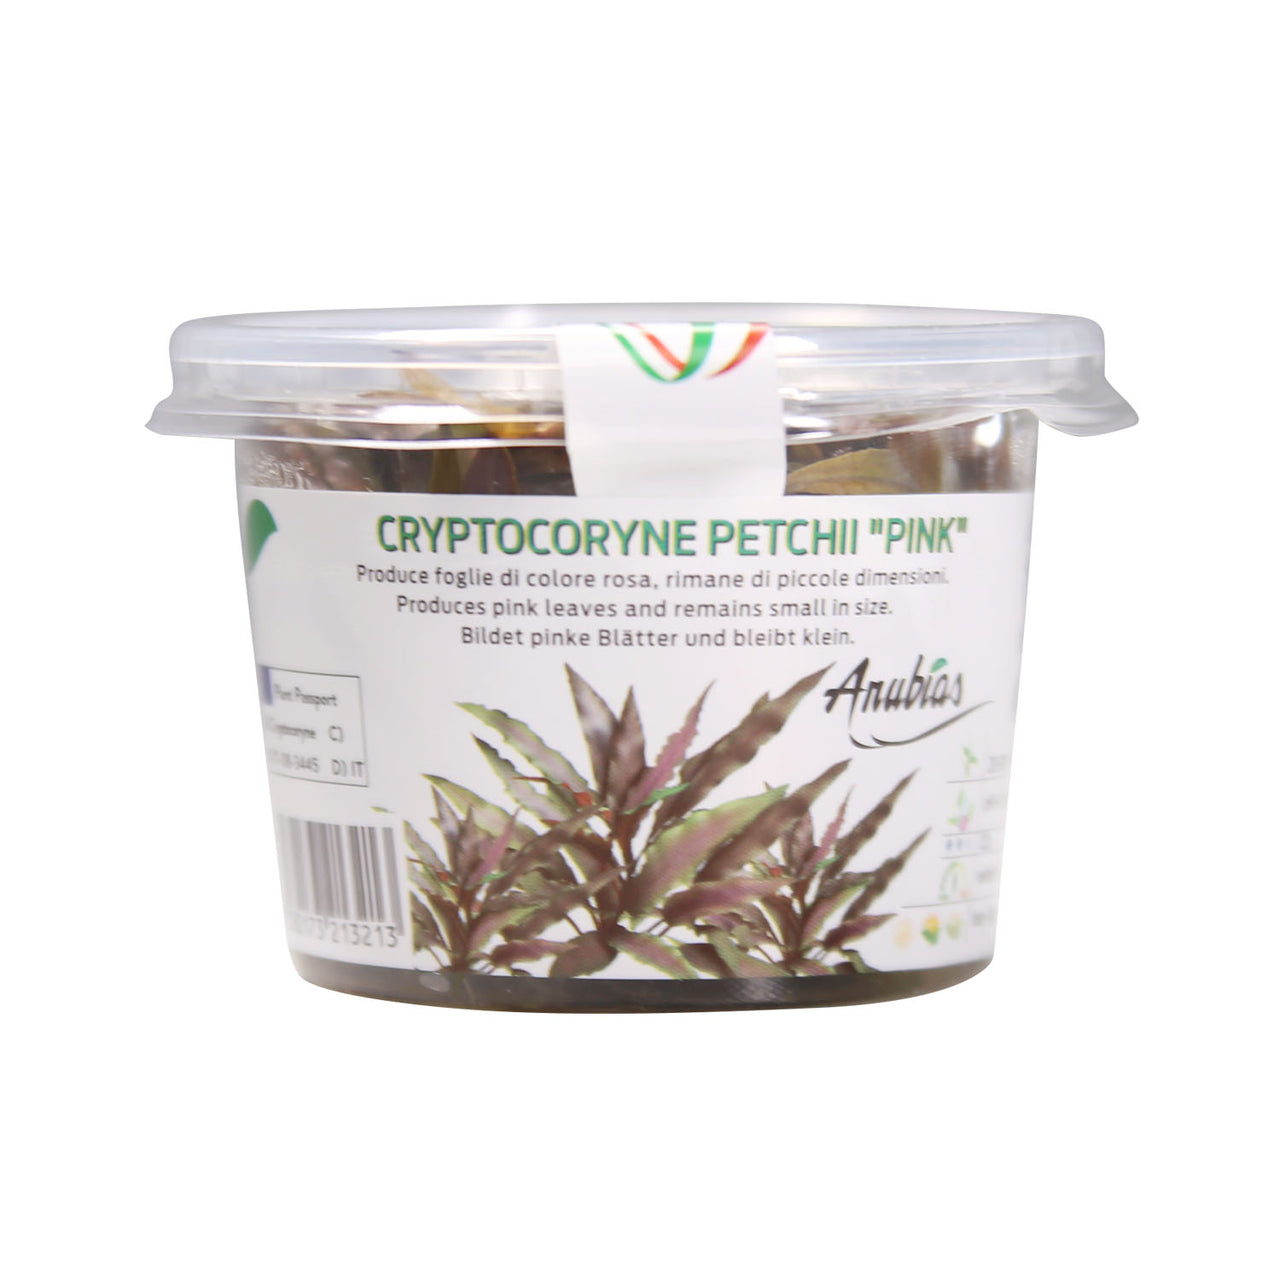 Cryptocoryne petchii 'pink' Tissue Culture Cup